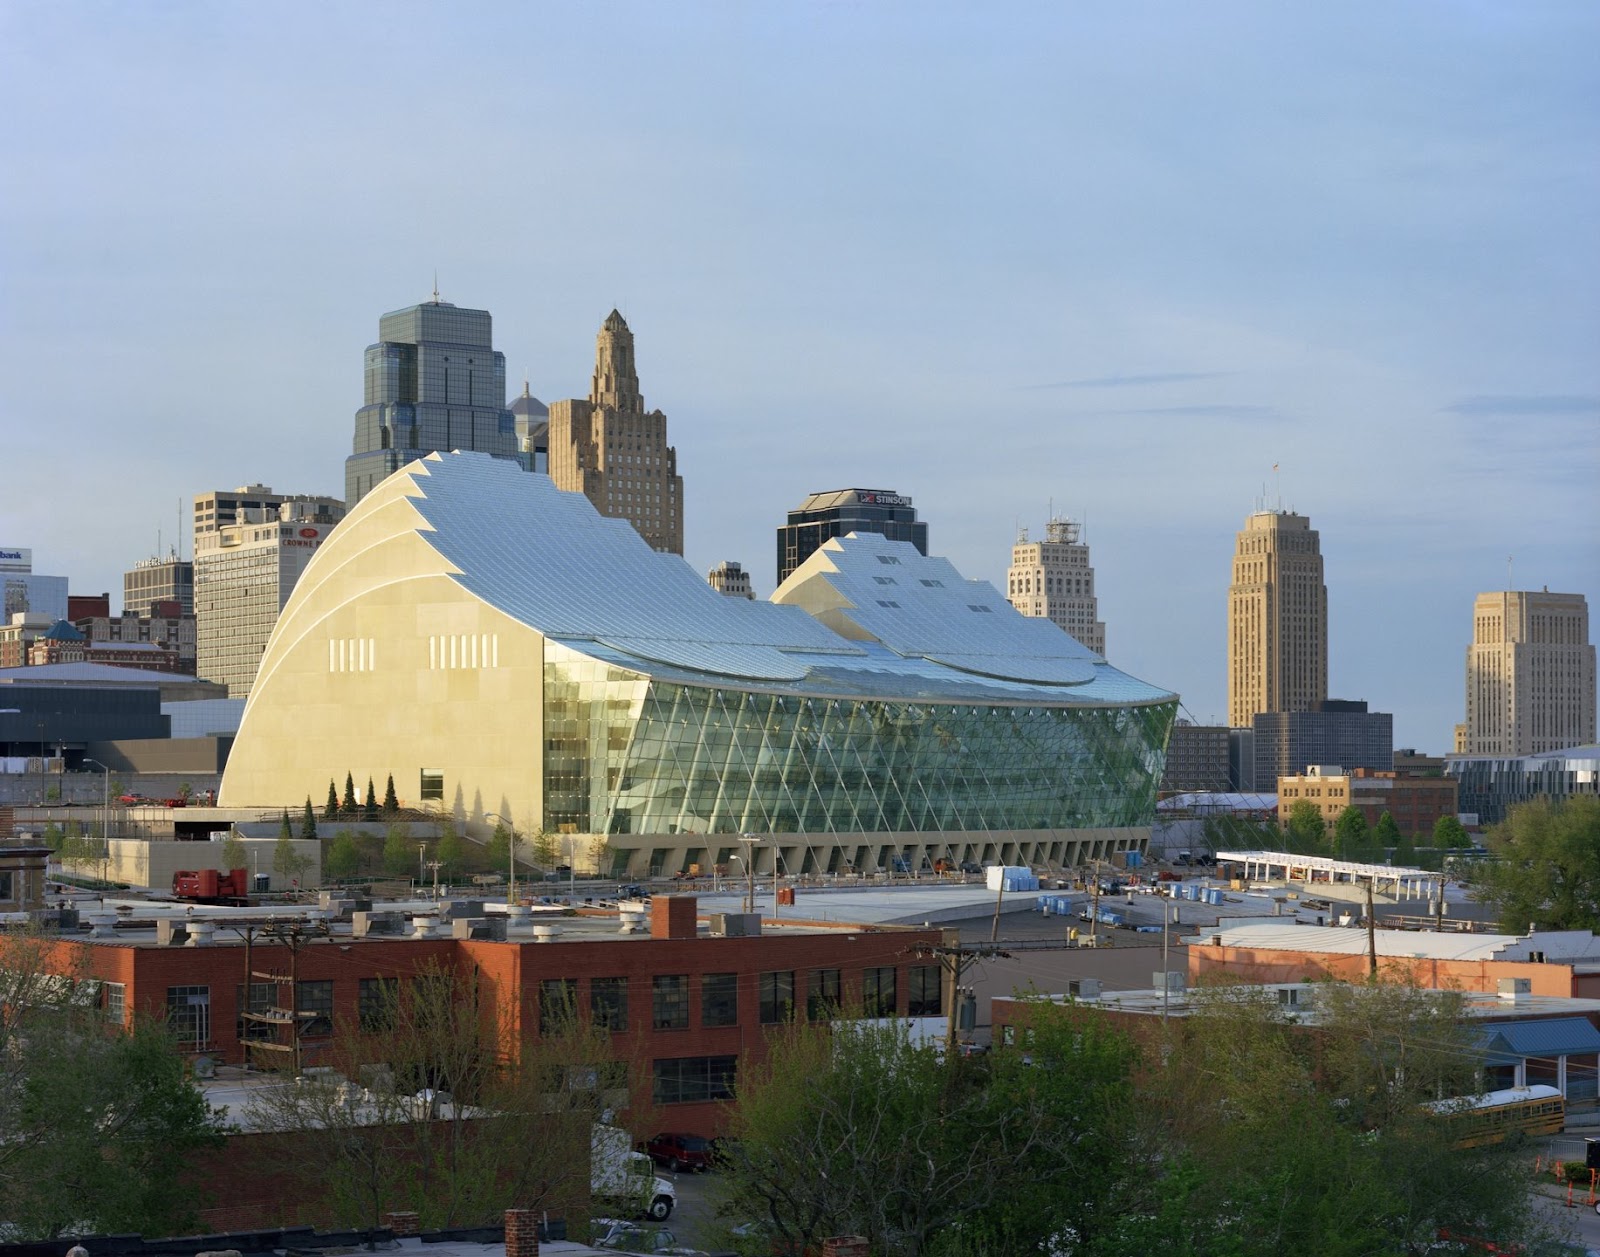 The Kauffman Center for Performing Arts by Moshe Safdie and BNIM Architects